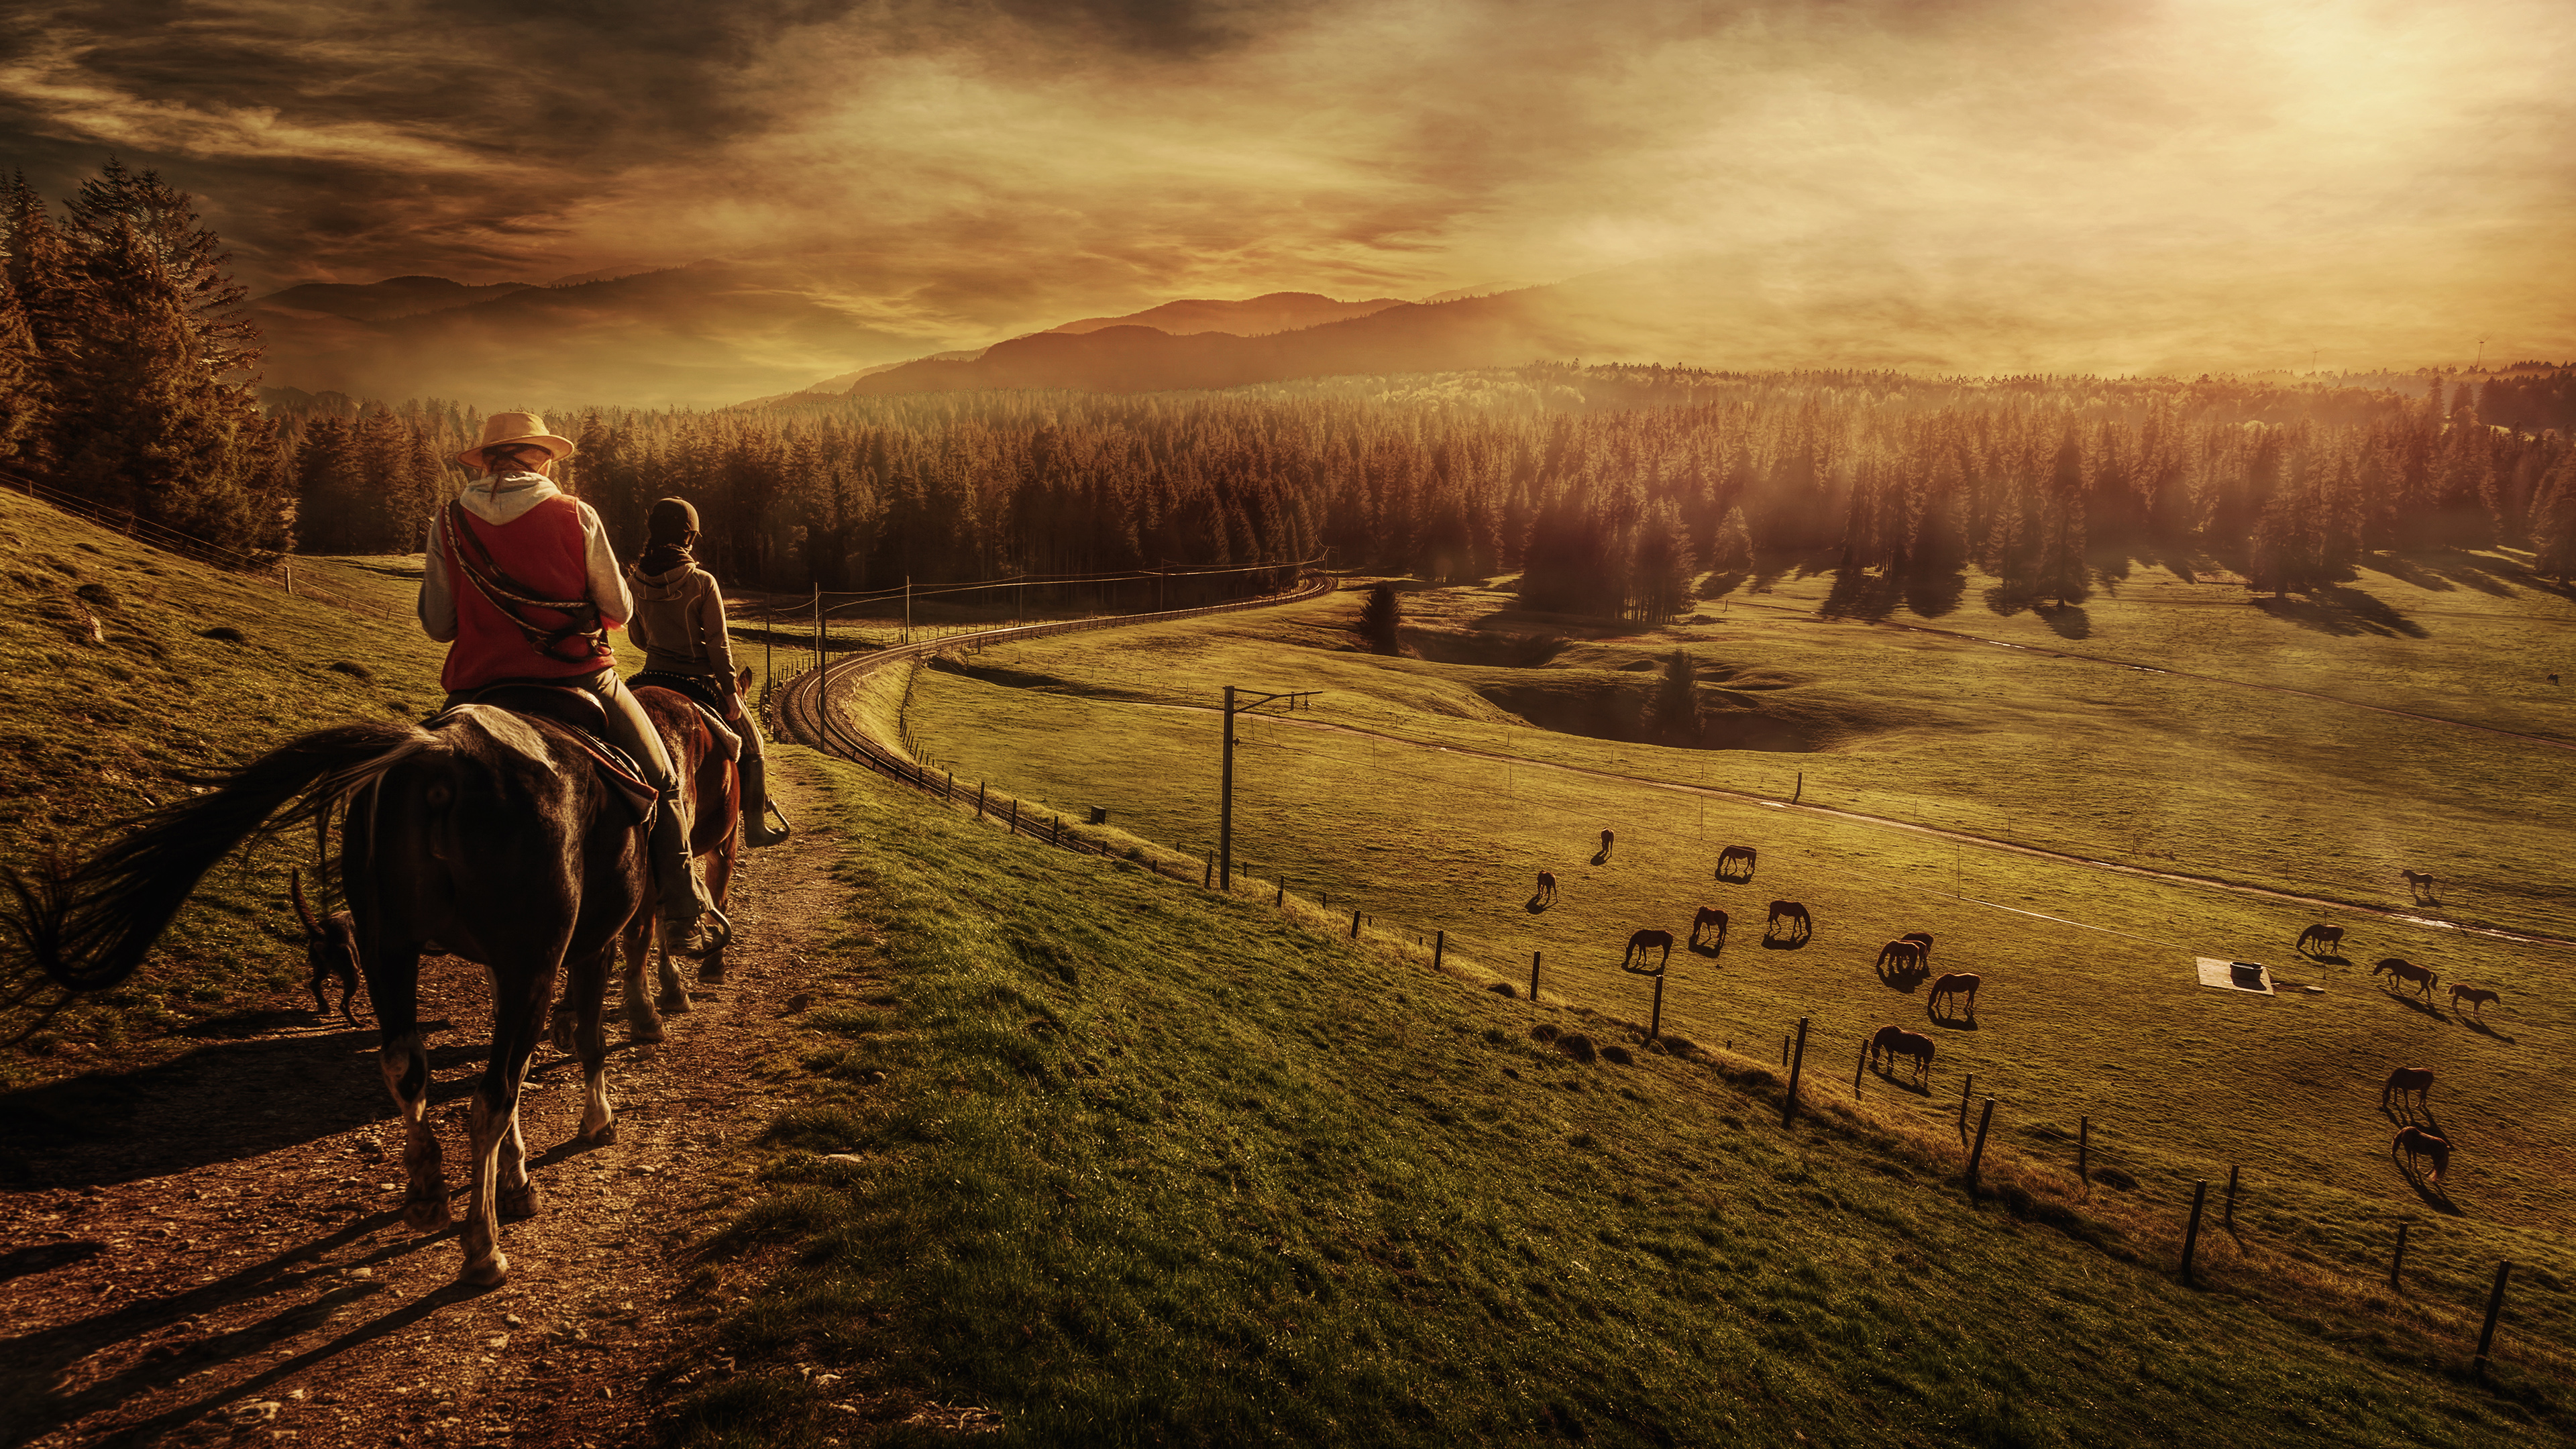 photography, landscape, people, horse, horse riding, sunset Full HD